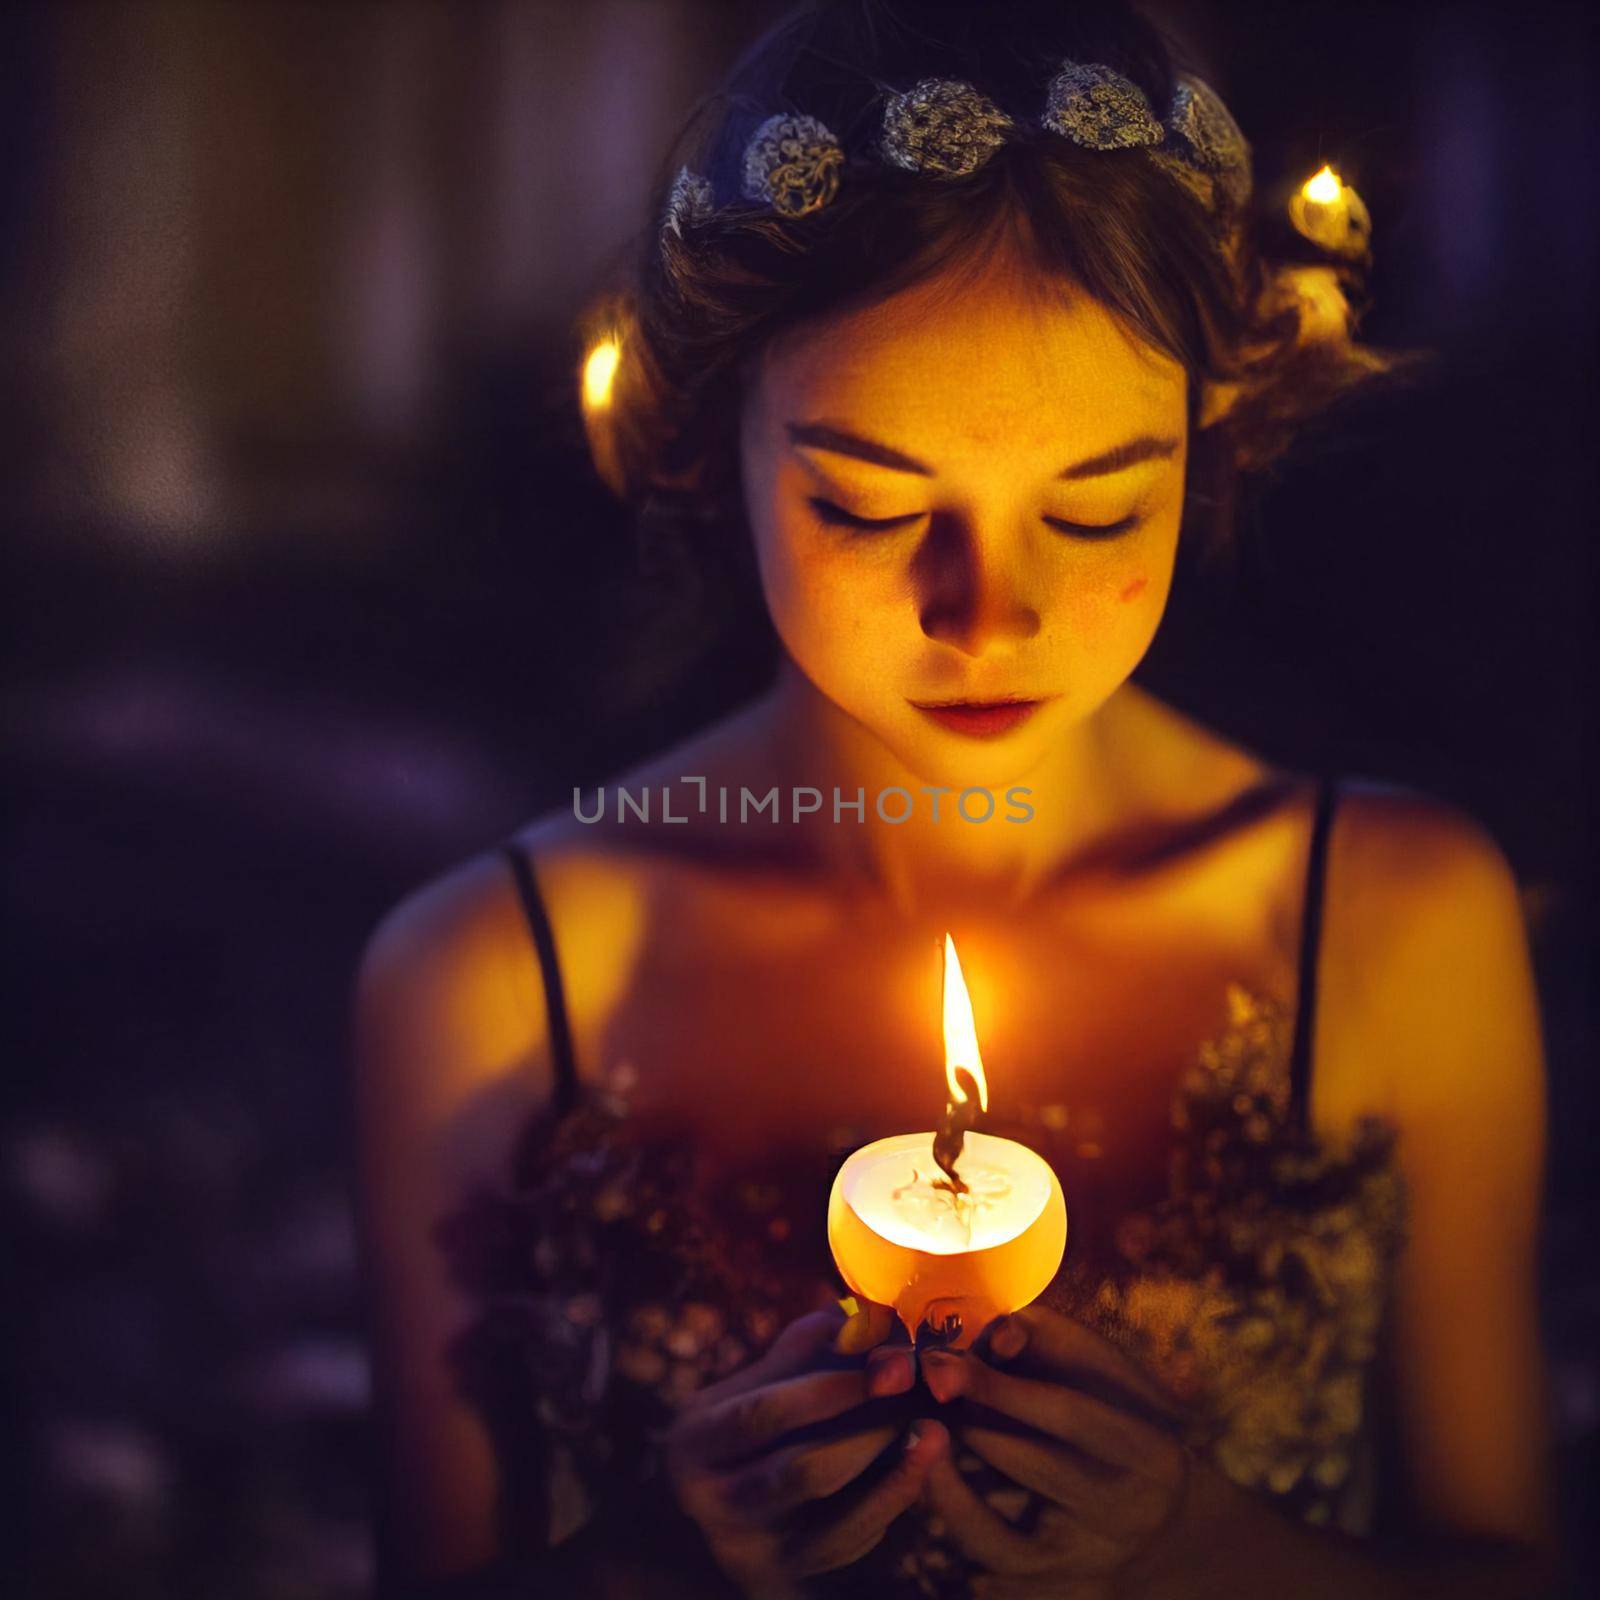 A girl who holds a candle on a gloomy background. High quality illustration